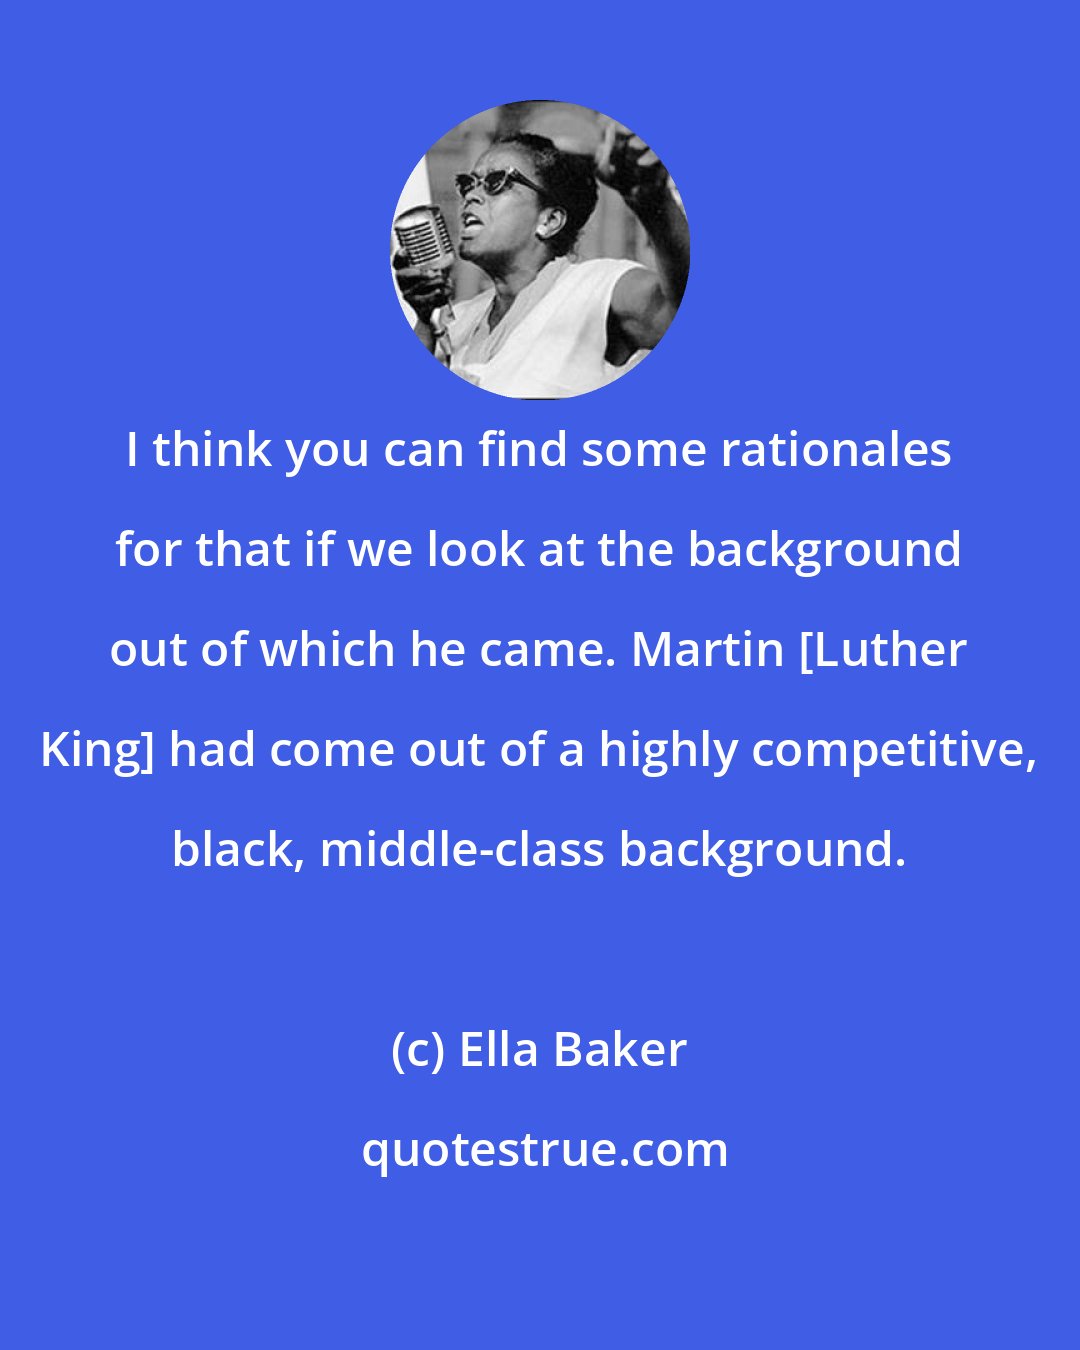 Ella Baker: I think you can find some rationales for that if we look at the background out of which he came. Martin [Luther King] had come out of a highly competitive, black, middle-class background.